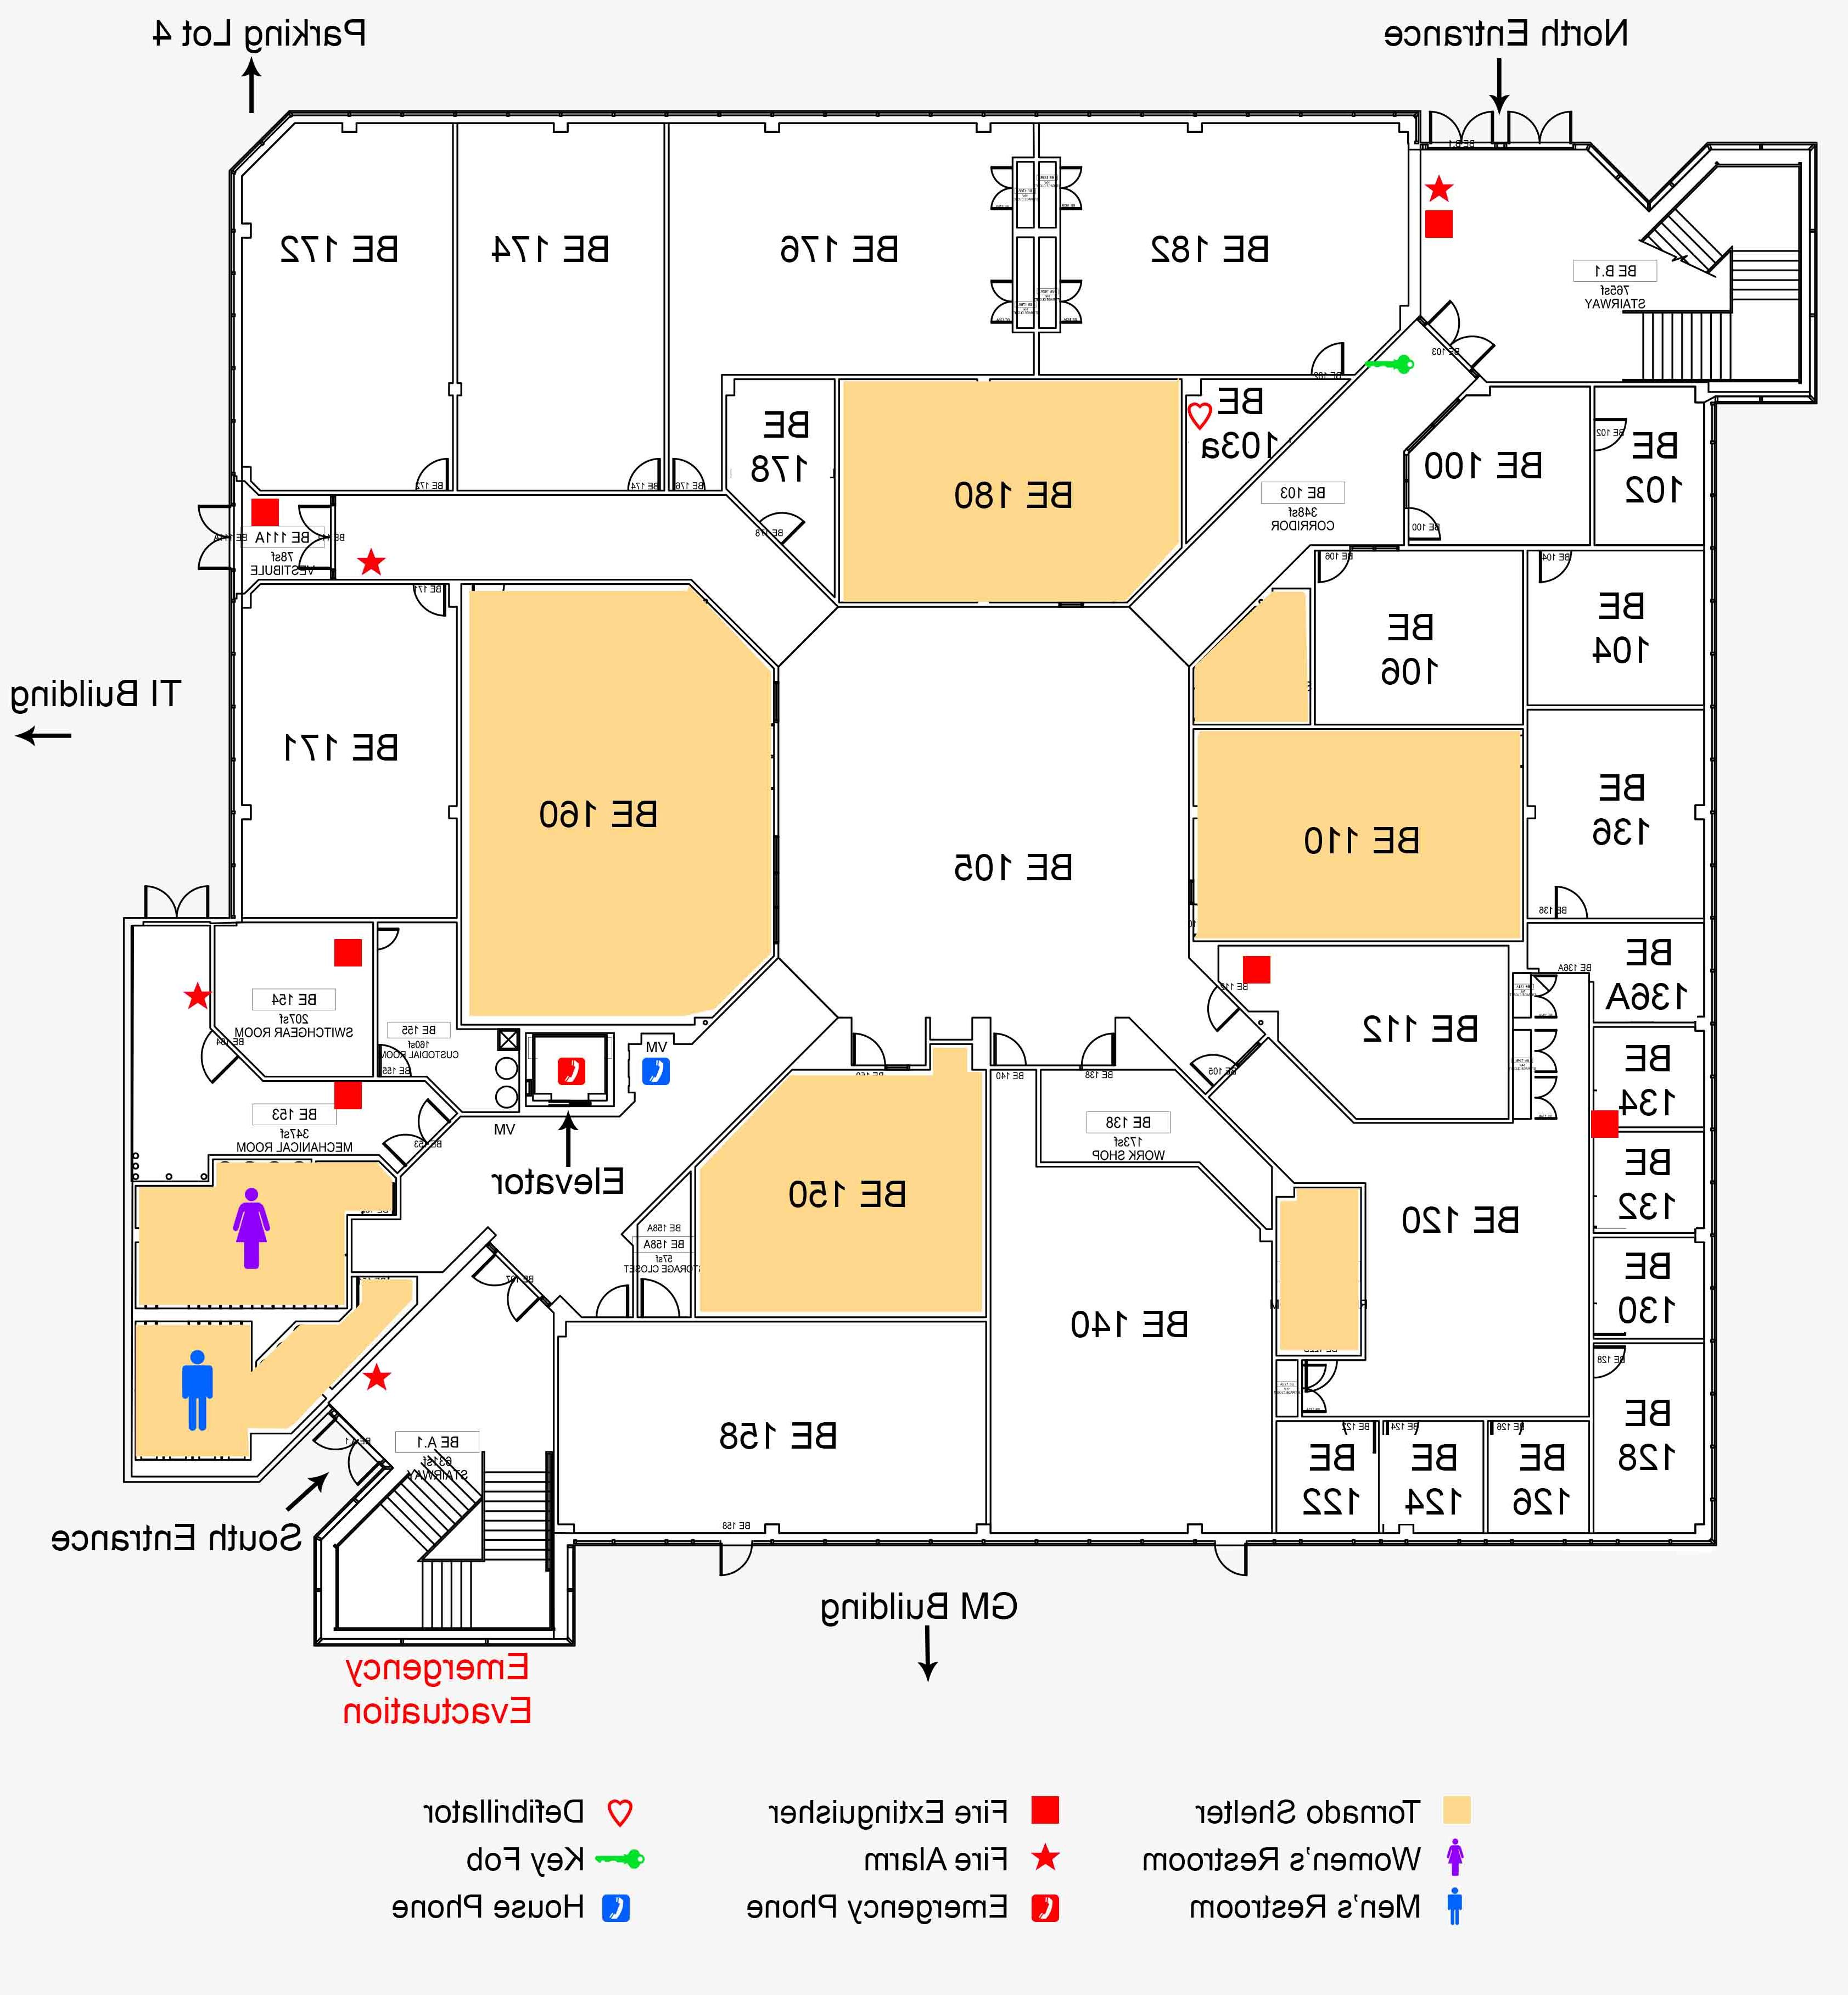 Business Education Building first floor map